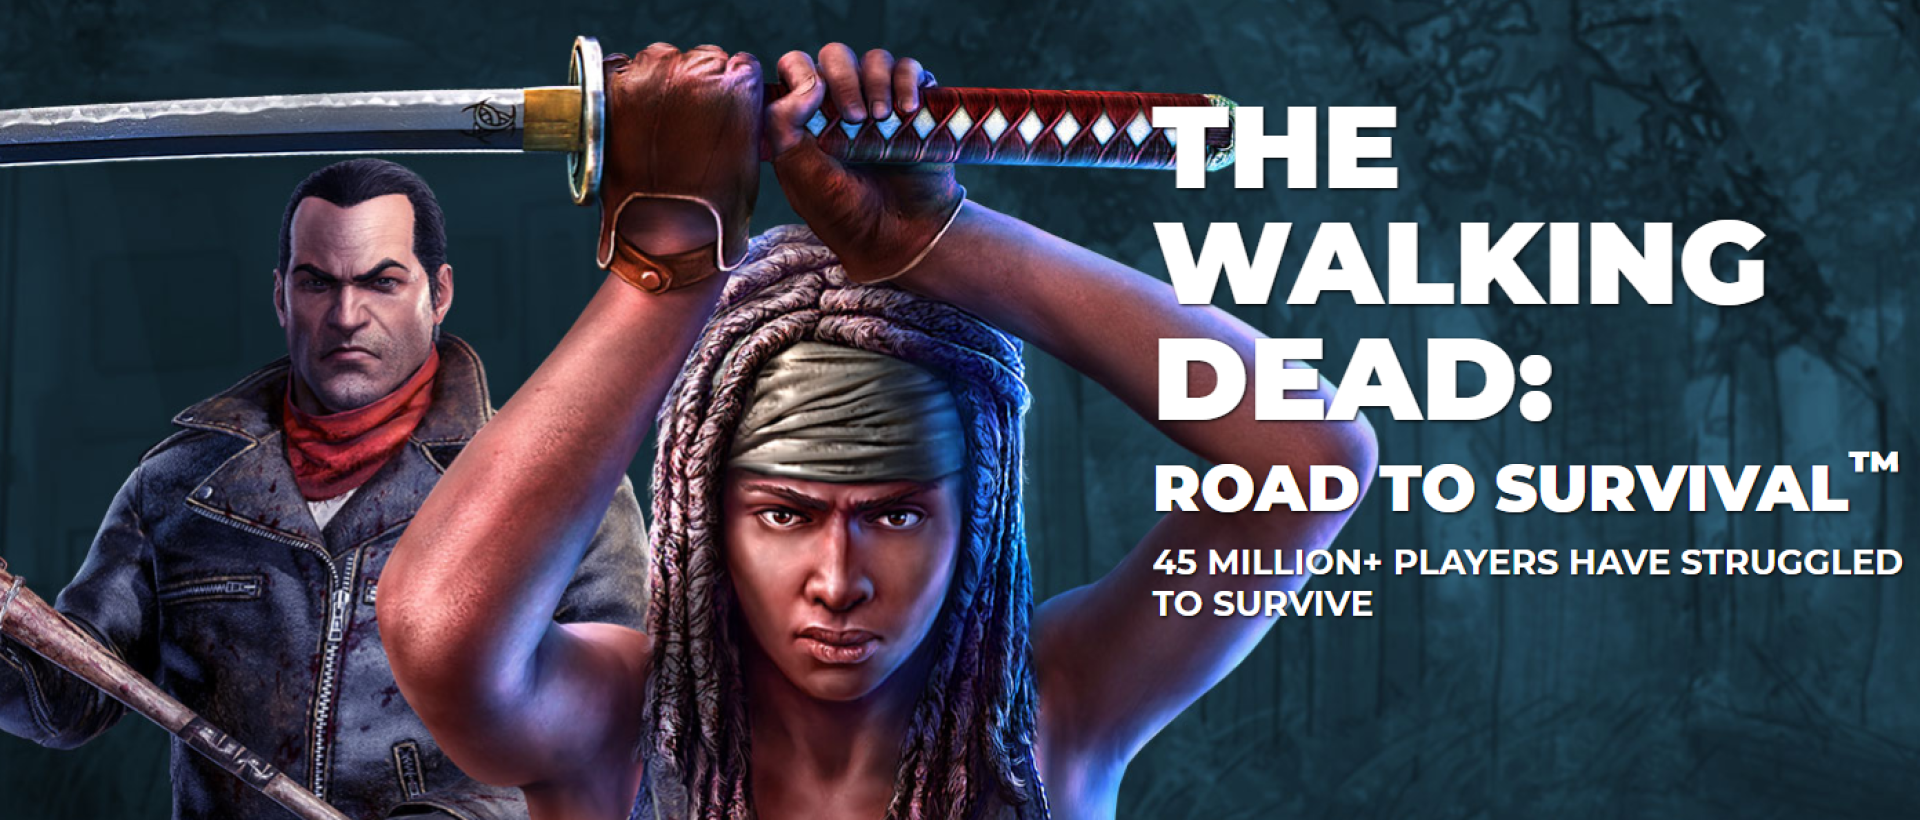 the walking dead road to survival game cih